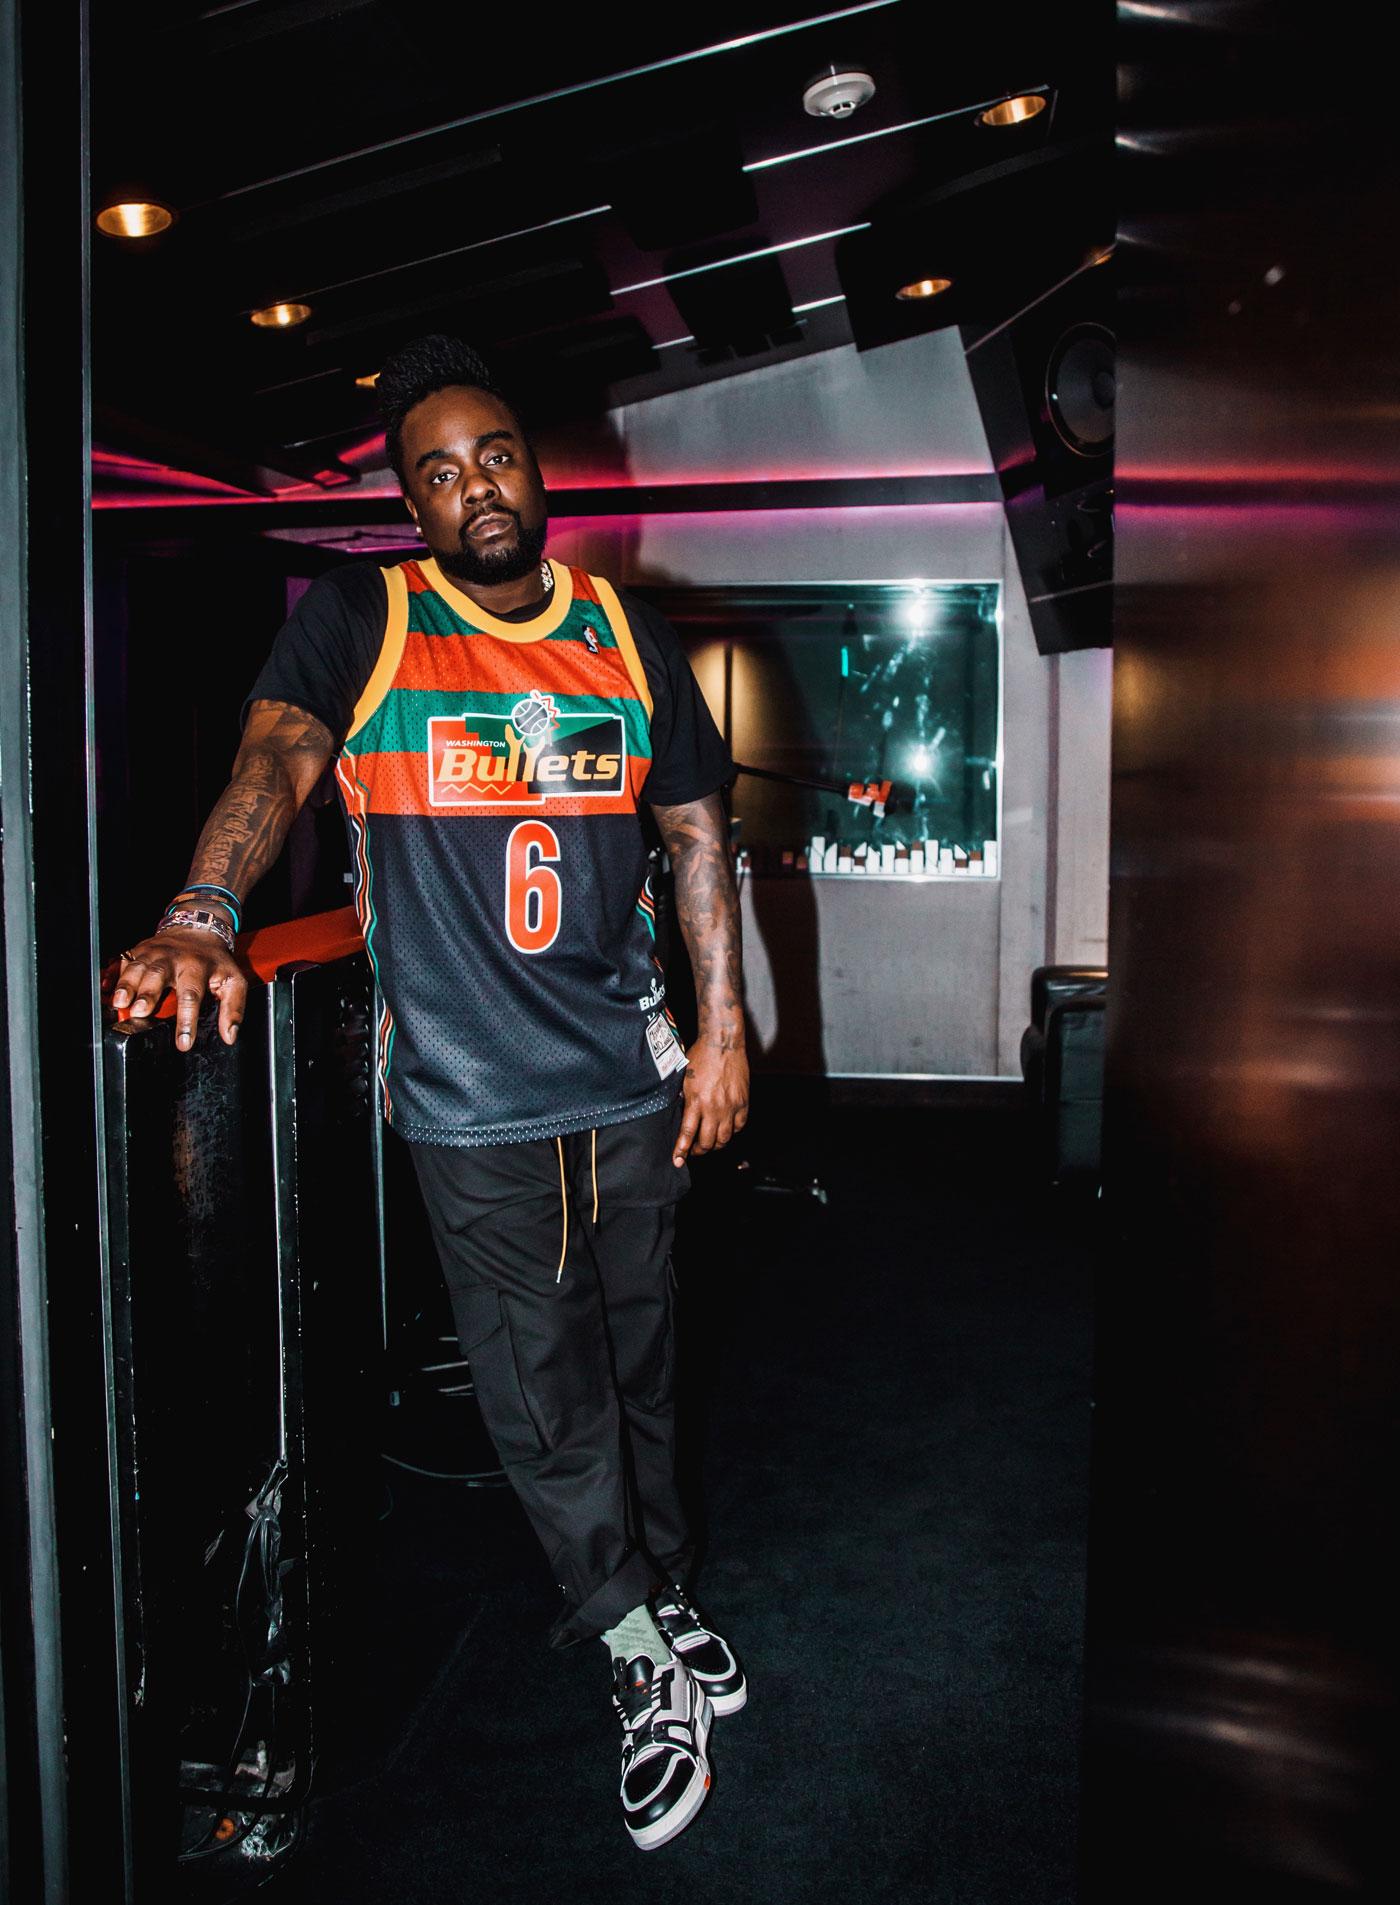 Bleacher Report + Mitchell & Ness + NBA collab with rappers to